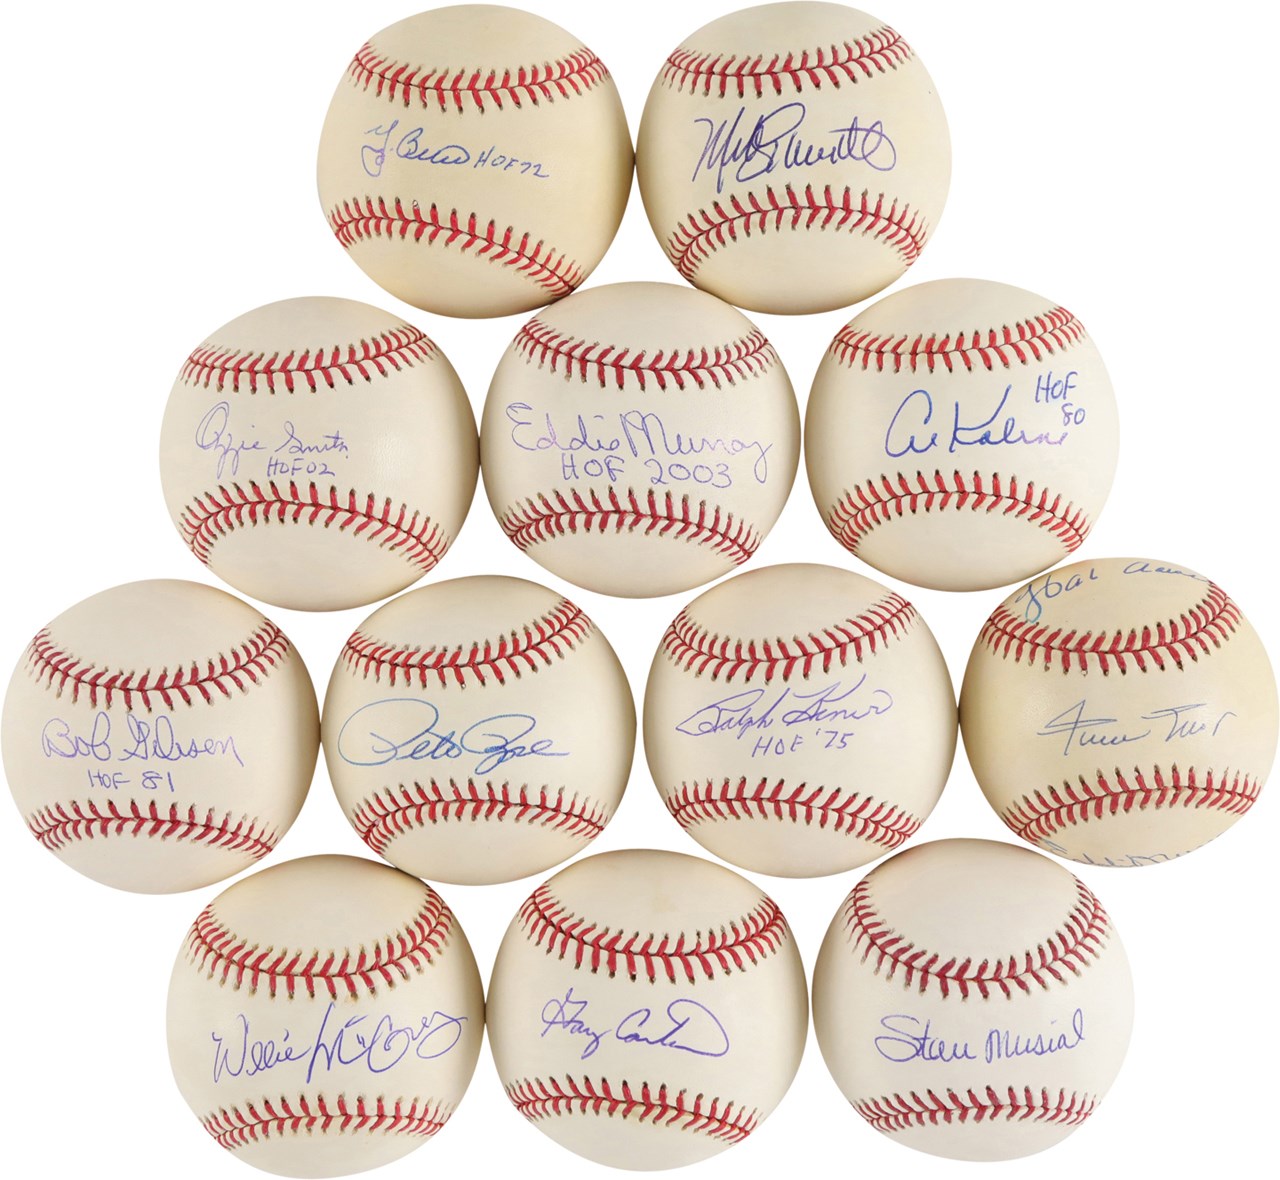 - HOFers & Stars Signed Baseball Collection w/Mays & Aaron (182)